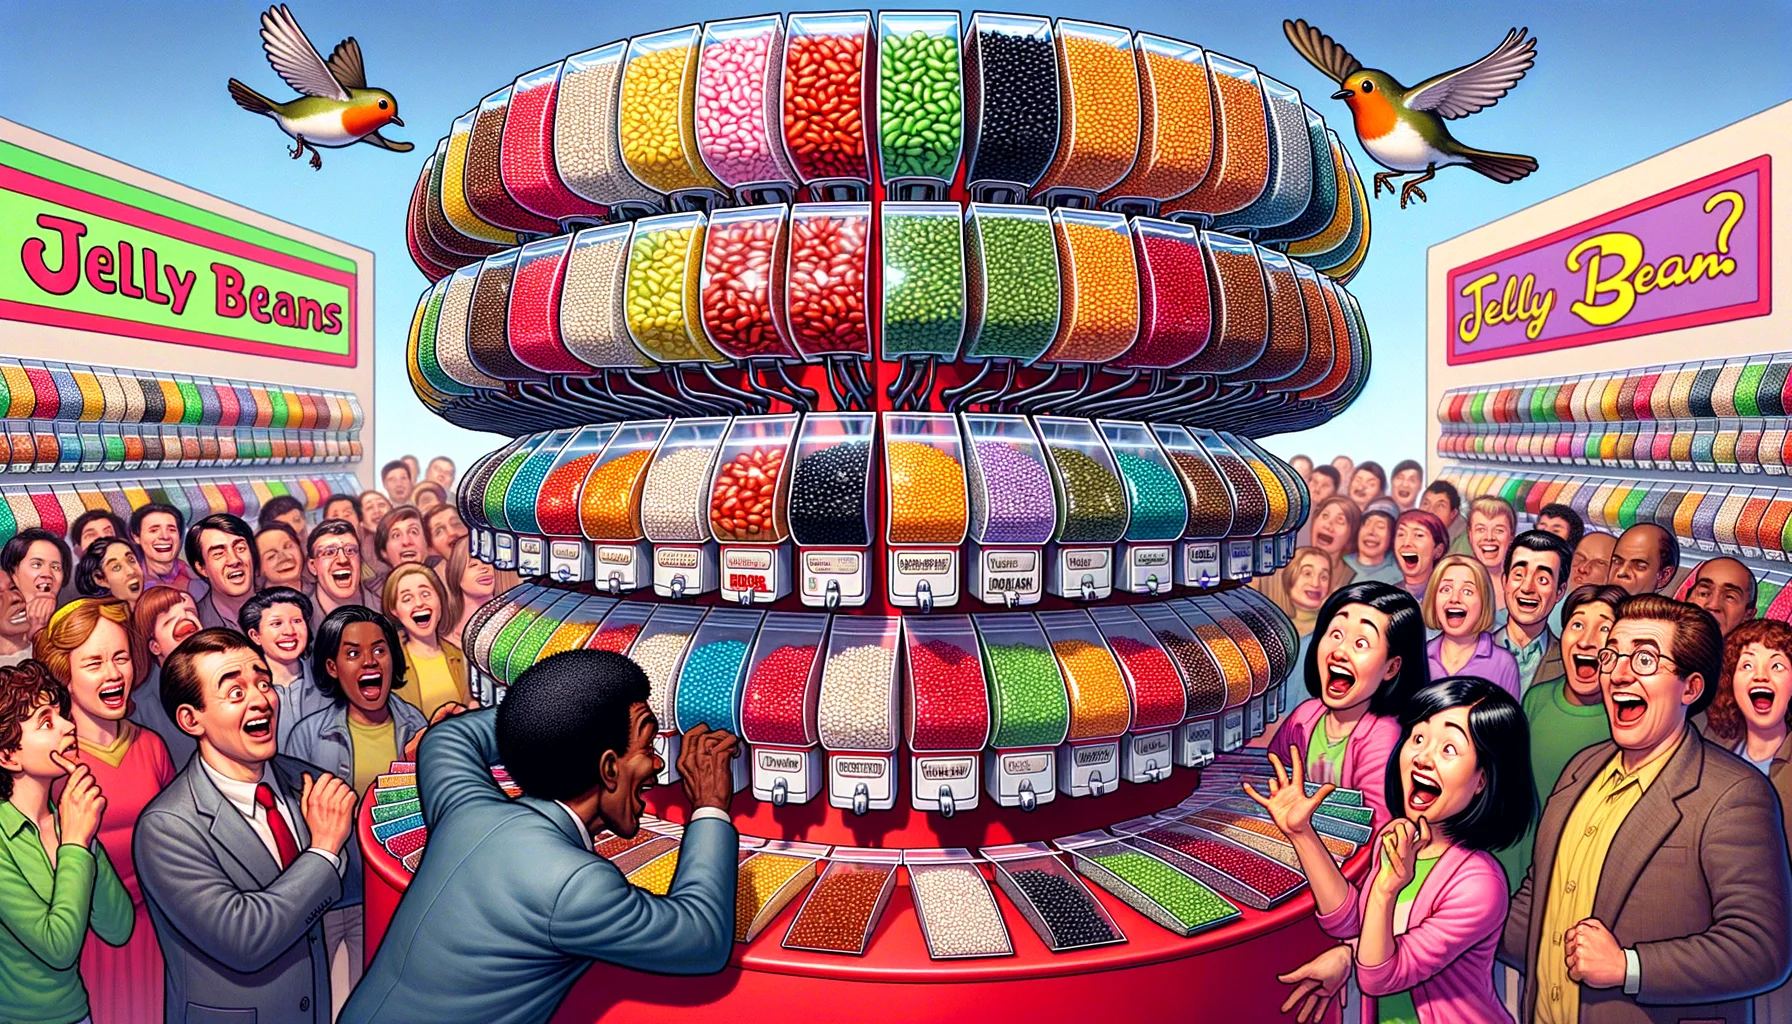 Imagine a humorous, attention-grabbing scene featuring Customizable Jelly Bean Variety Packs. Picture this: a brightly decorated candy store is in the background. In the foreground, a multitude of vibrant jelly beans in all colors of the rainbow, packed in clear pouches grouped by flavor. Some packs are hanging from a comically oversized tree-like stand, while others are presented on a whimsical conveyer belt operated by robins. A bewildered customer, an African-American man, is trying to choose from the unlimited options, while an East Asian female employee adds more bags to the tree with a candy cane-shaped hook, both laughing at the absurdity of the jelly bean abundance.